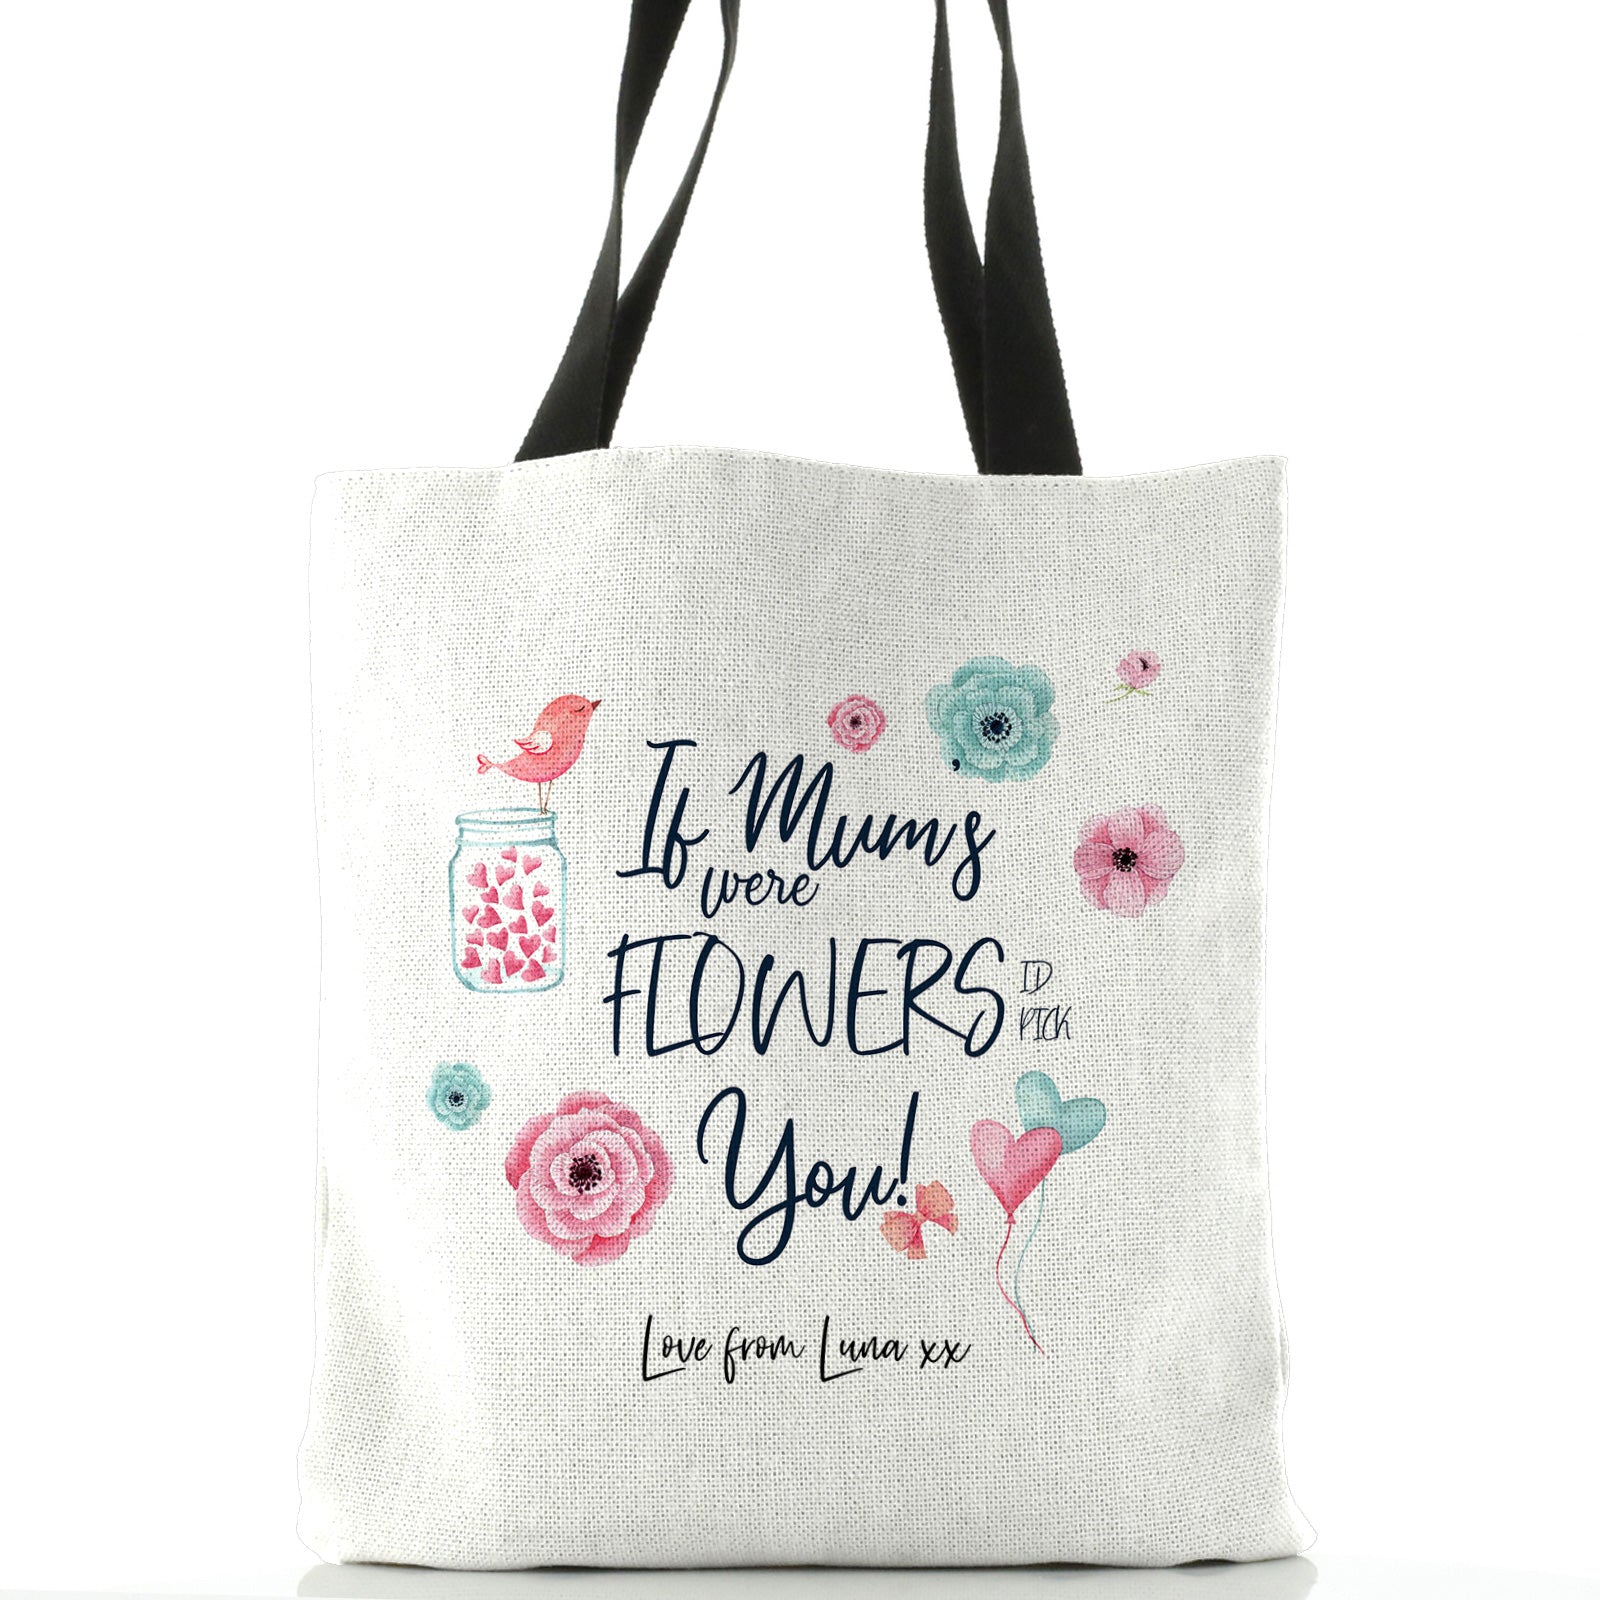 Personalised White Tote Bag with Stylish Text and Flowers Love Message